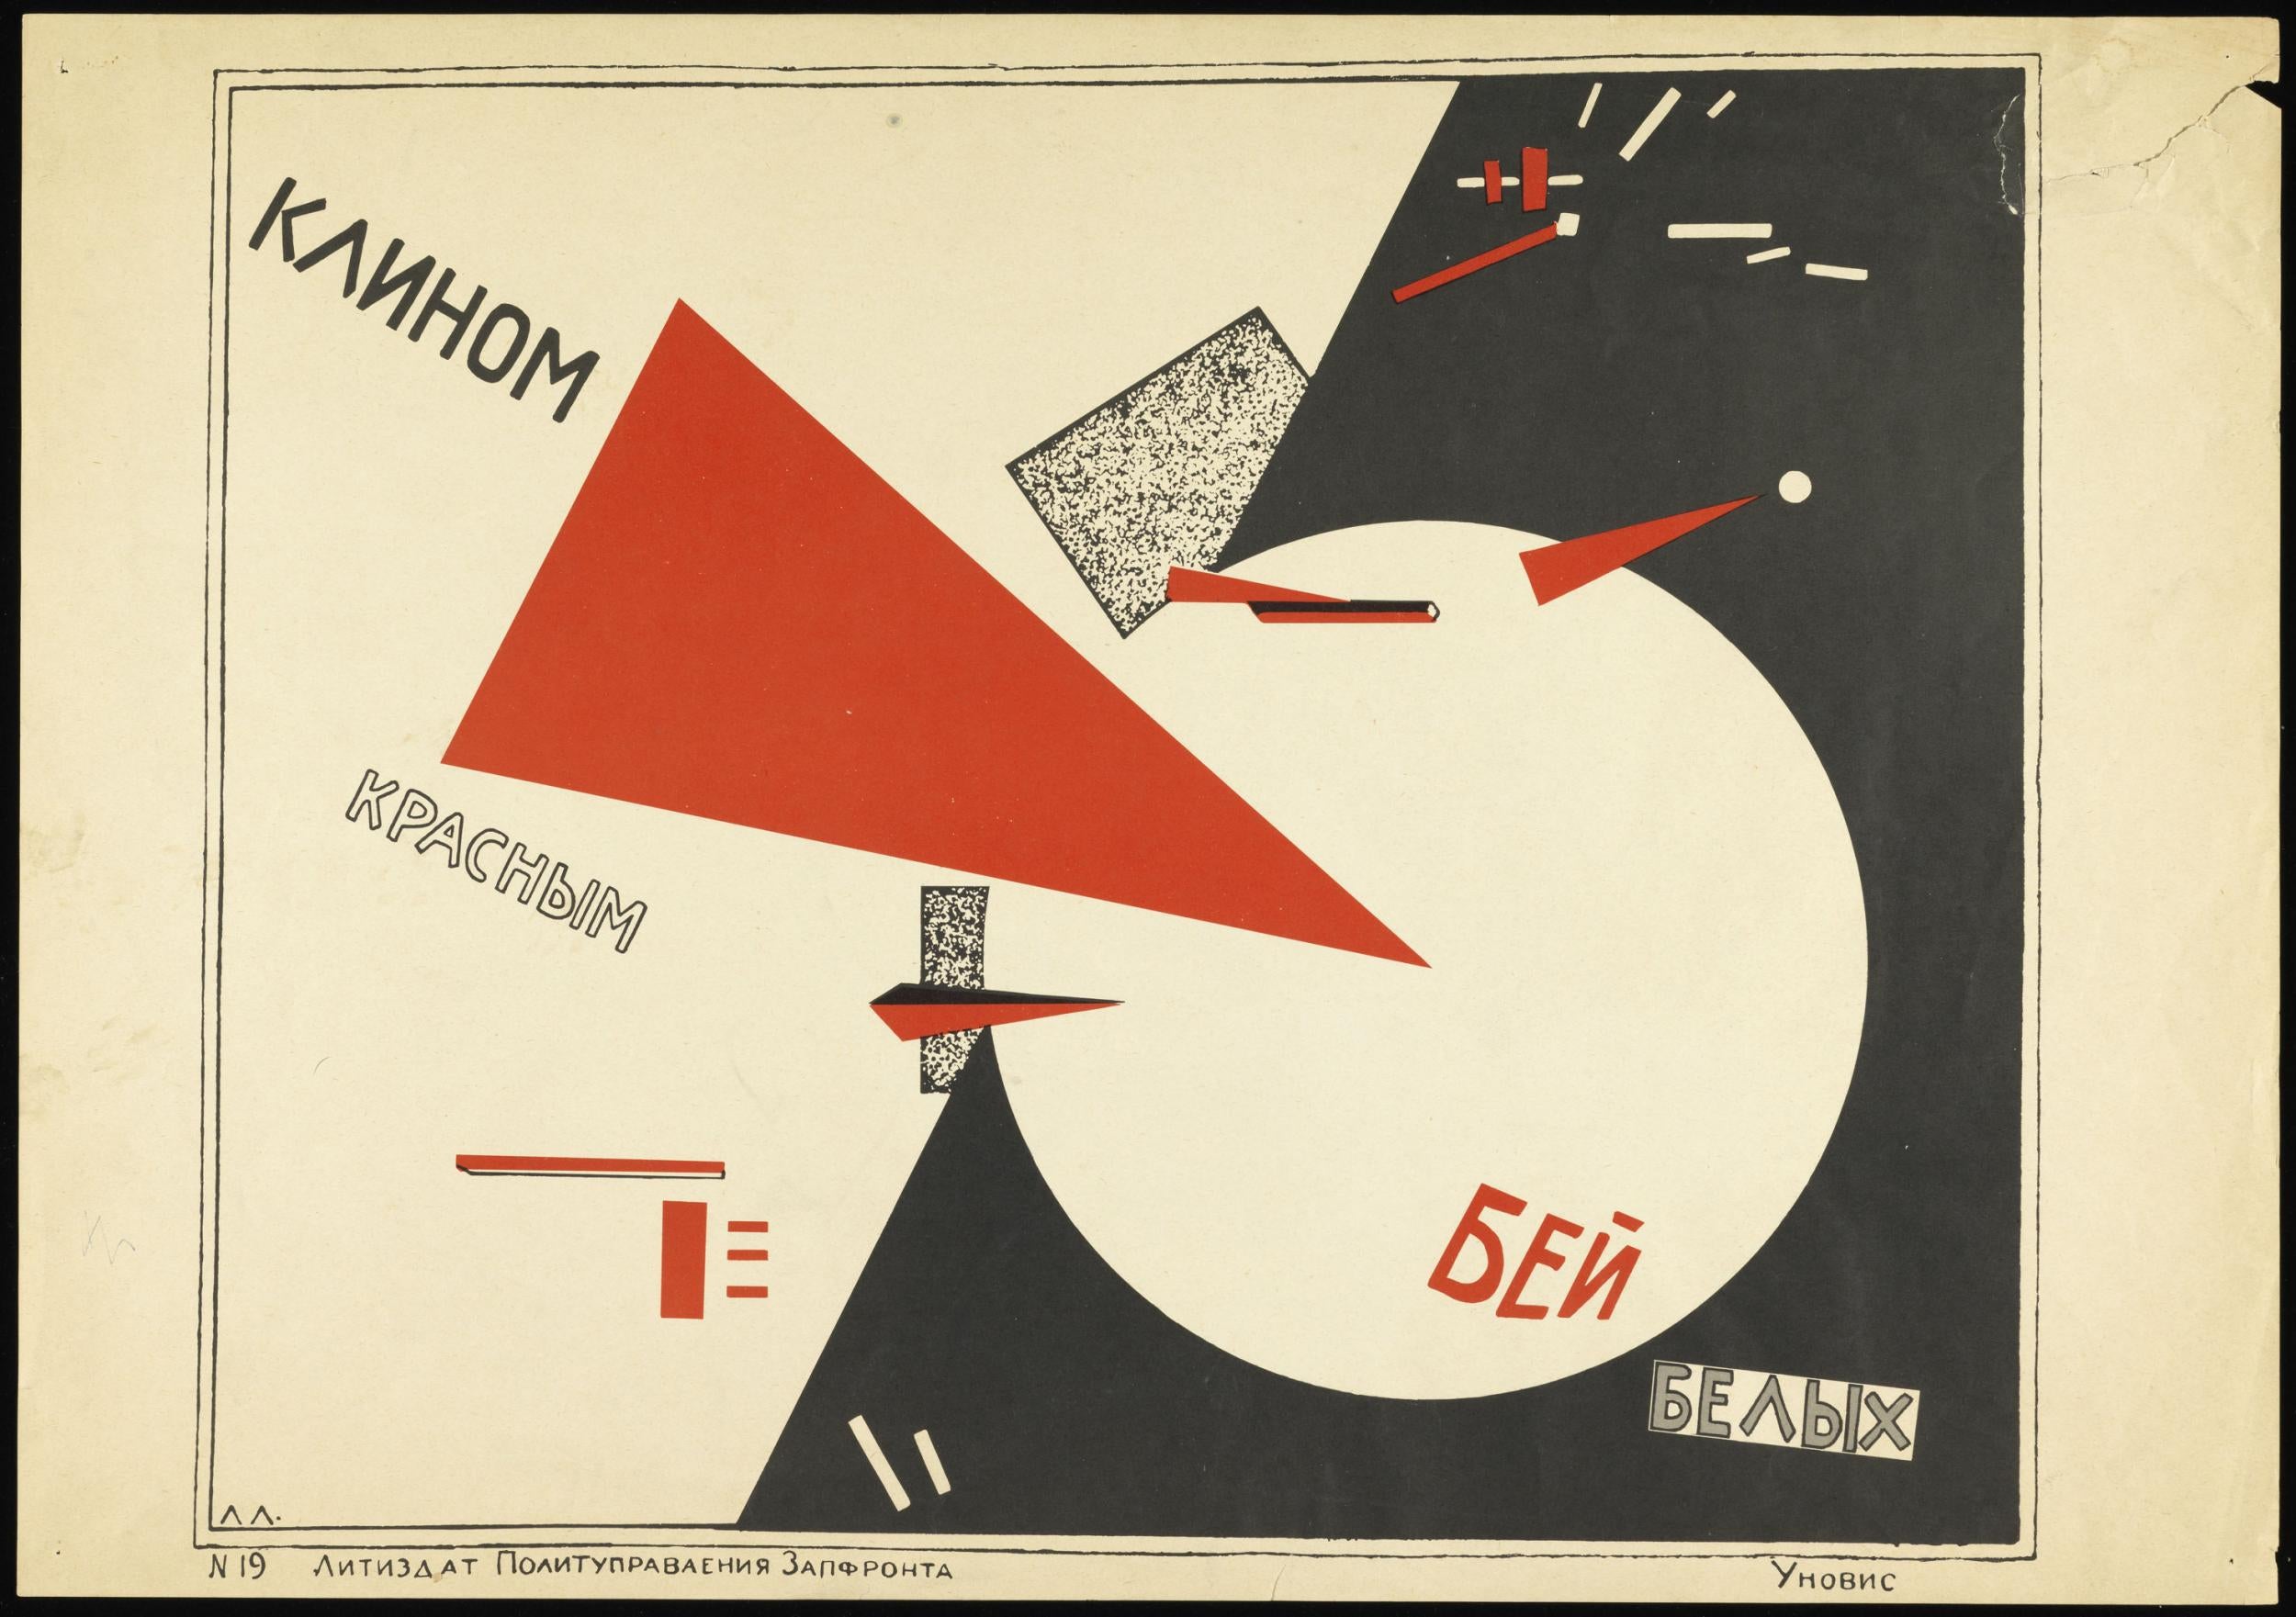 El Lissitzky, 'Beat the Whites with the Red Wedge', 1920, part of a fascinating collection at the Tate Modern